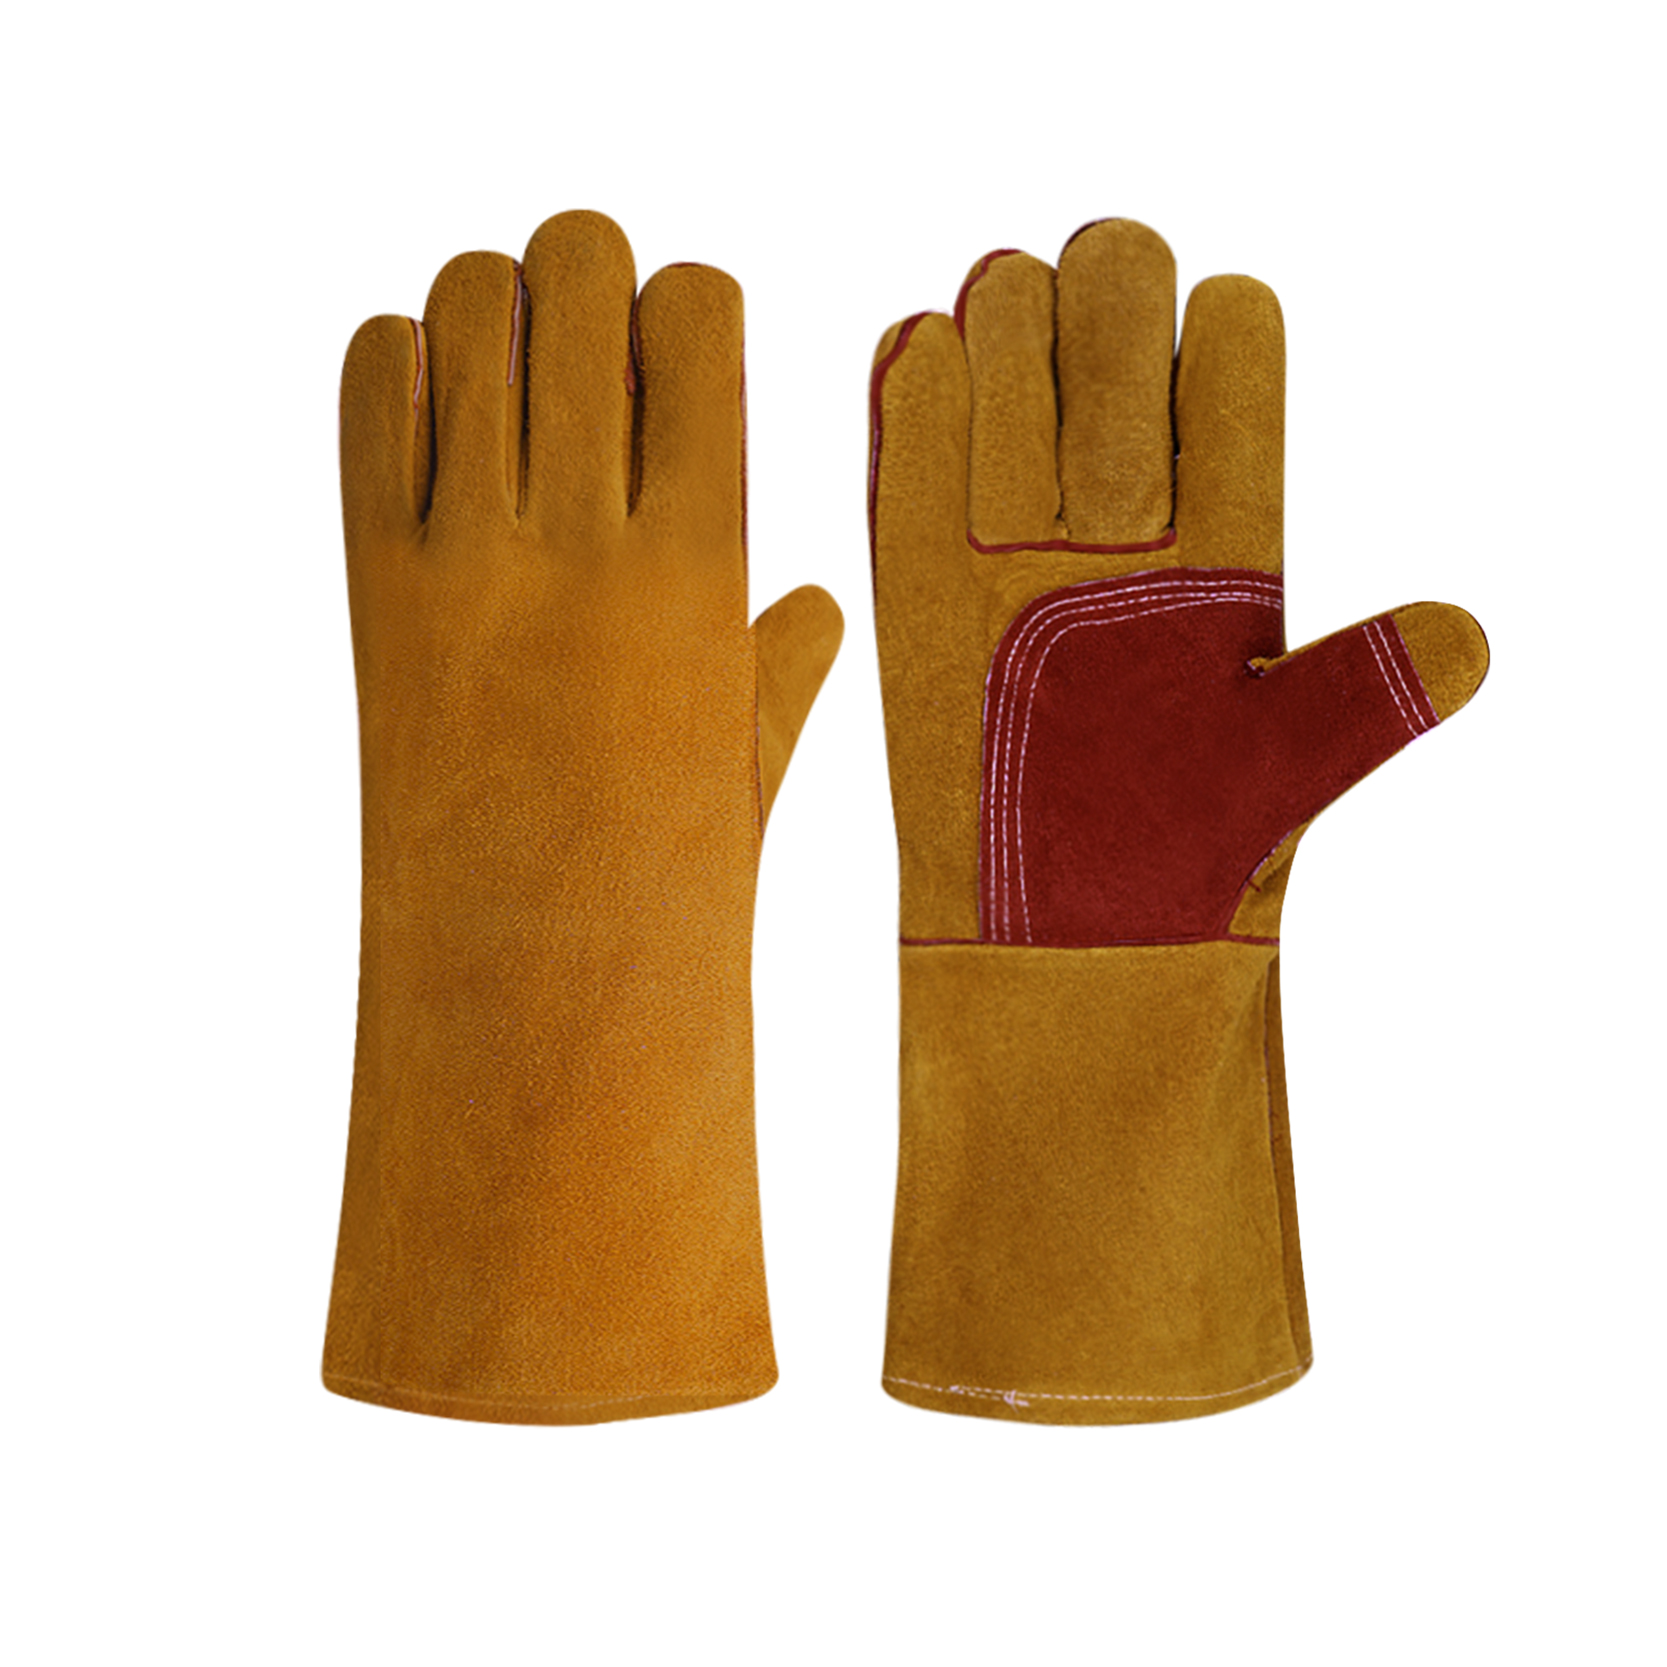 Industrial protective cow split leather safety gloves working gloves tig welding gloves